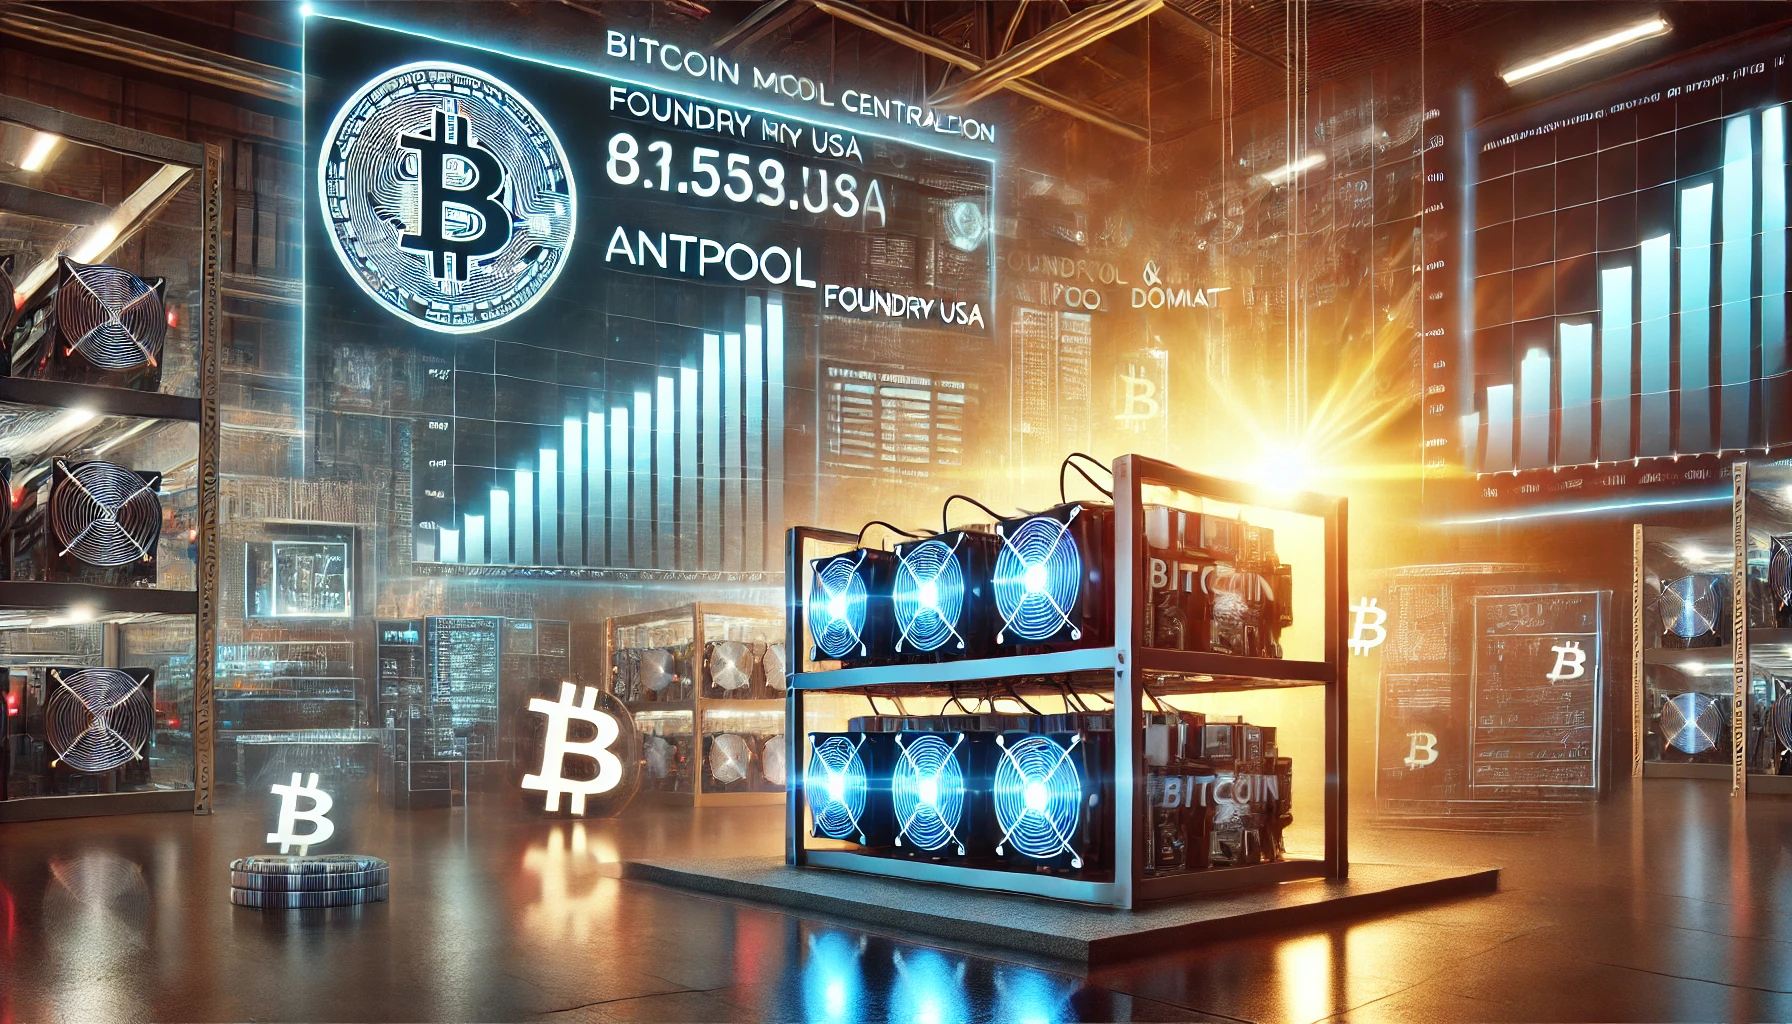 Bitcoin Mining Pool Centralization Raises Concerns as Foundry USA and Antpool Dominate Market